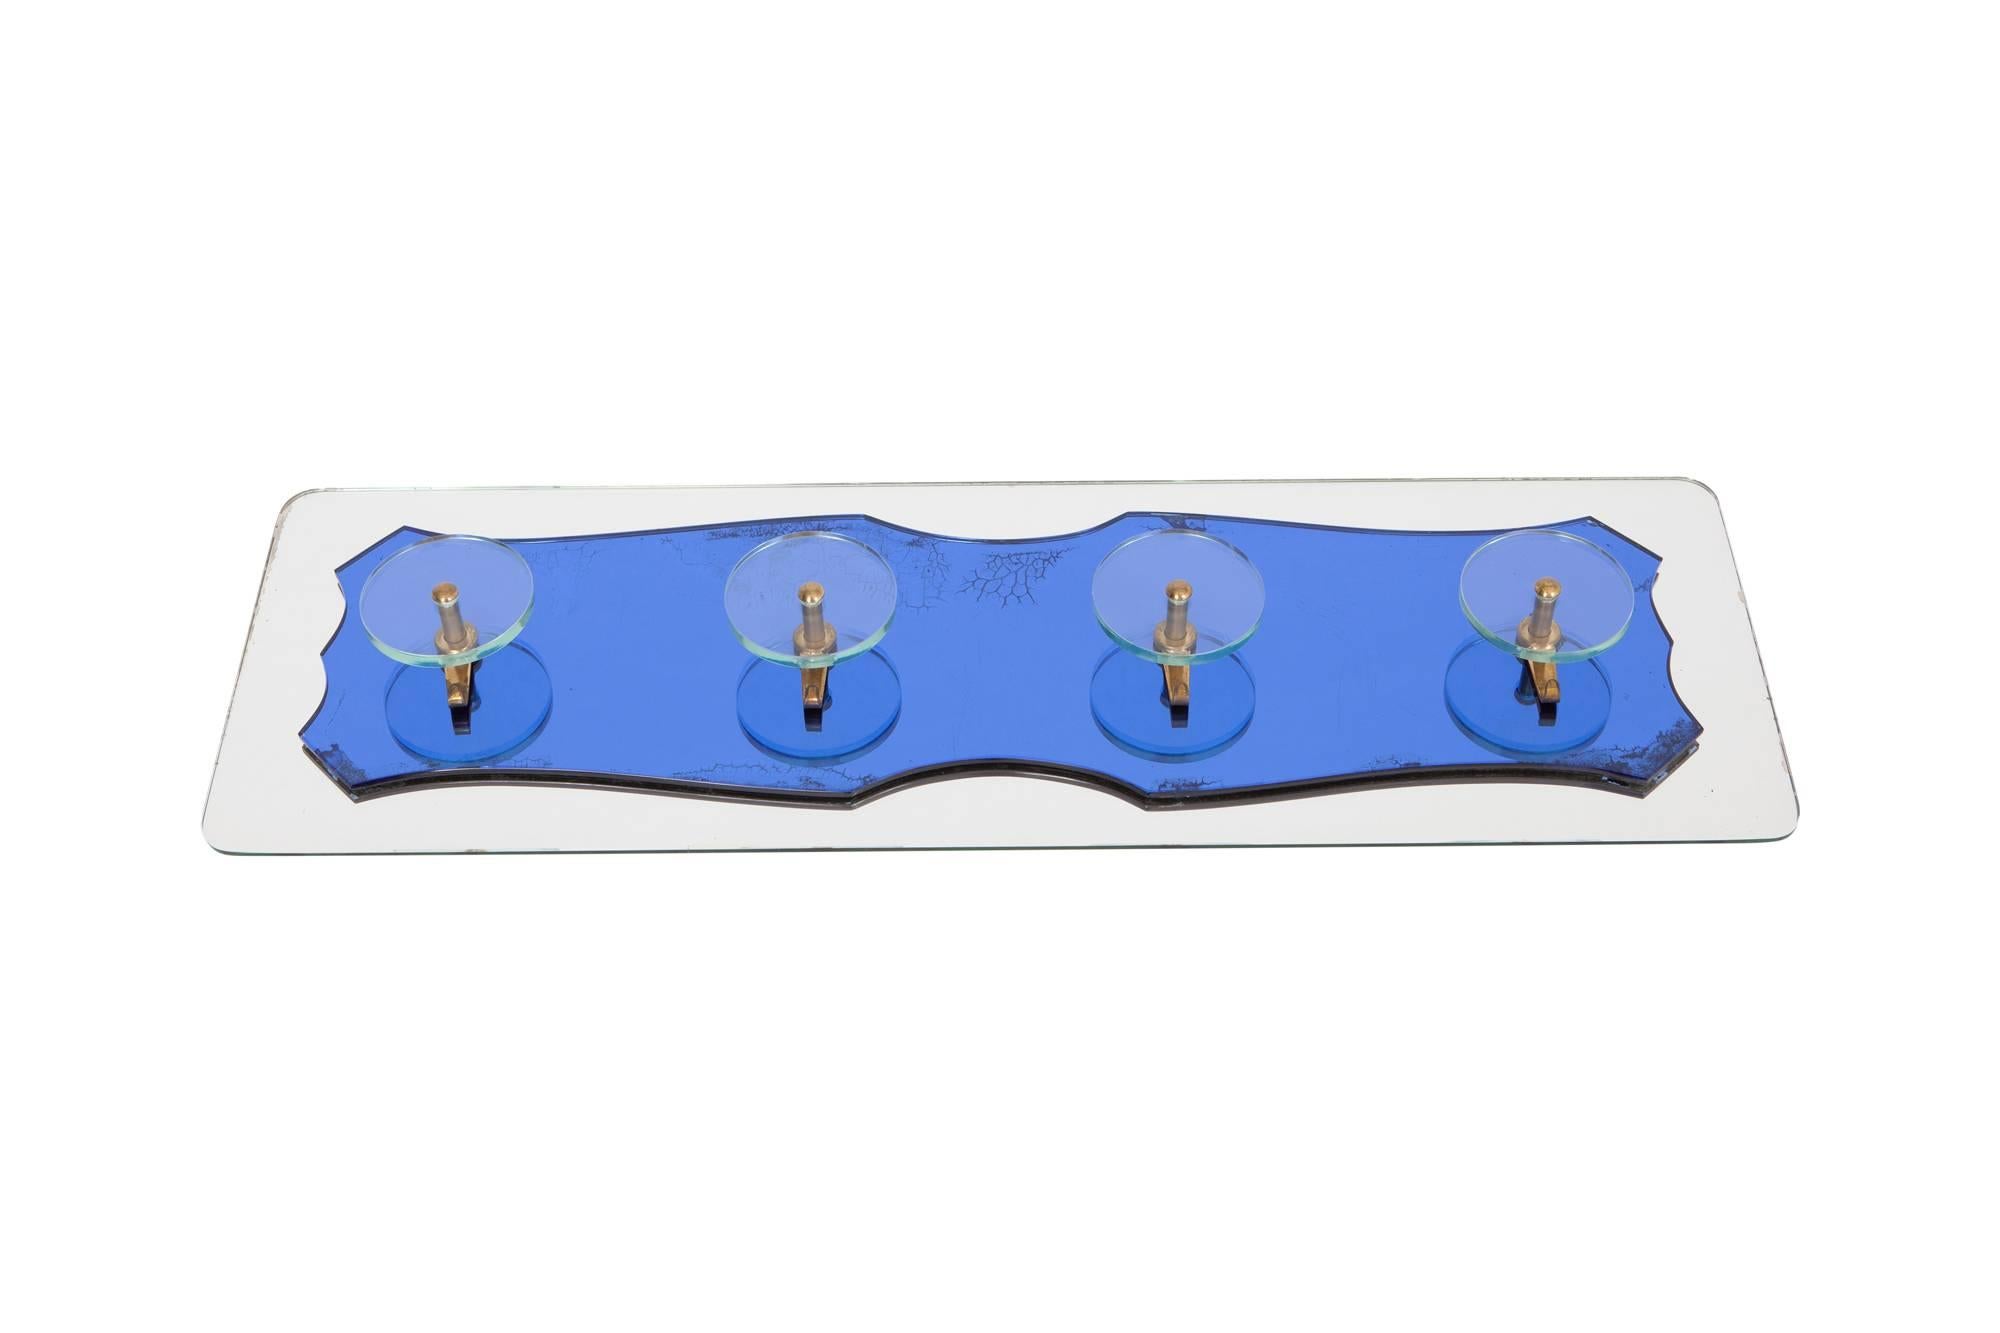 Mid-century modern Rectangular coatrack in Fontana Arte style, Italy, 1970s. Mirrored and blue colored glass that is cut out in an interesting shaped. 
The Blue glass shows some panting which give it an characteristic look. The four round shaped